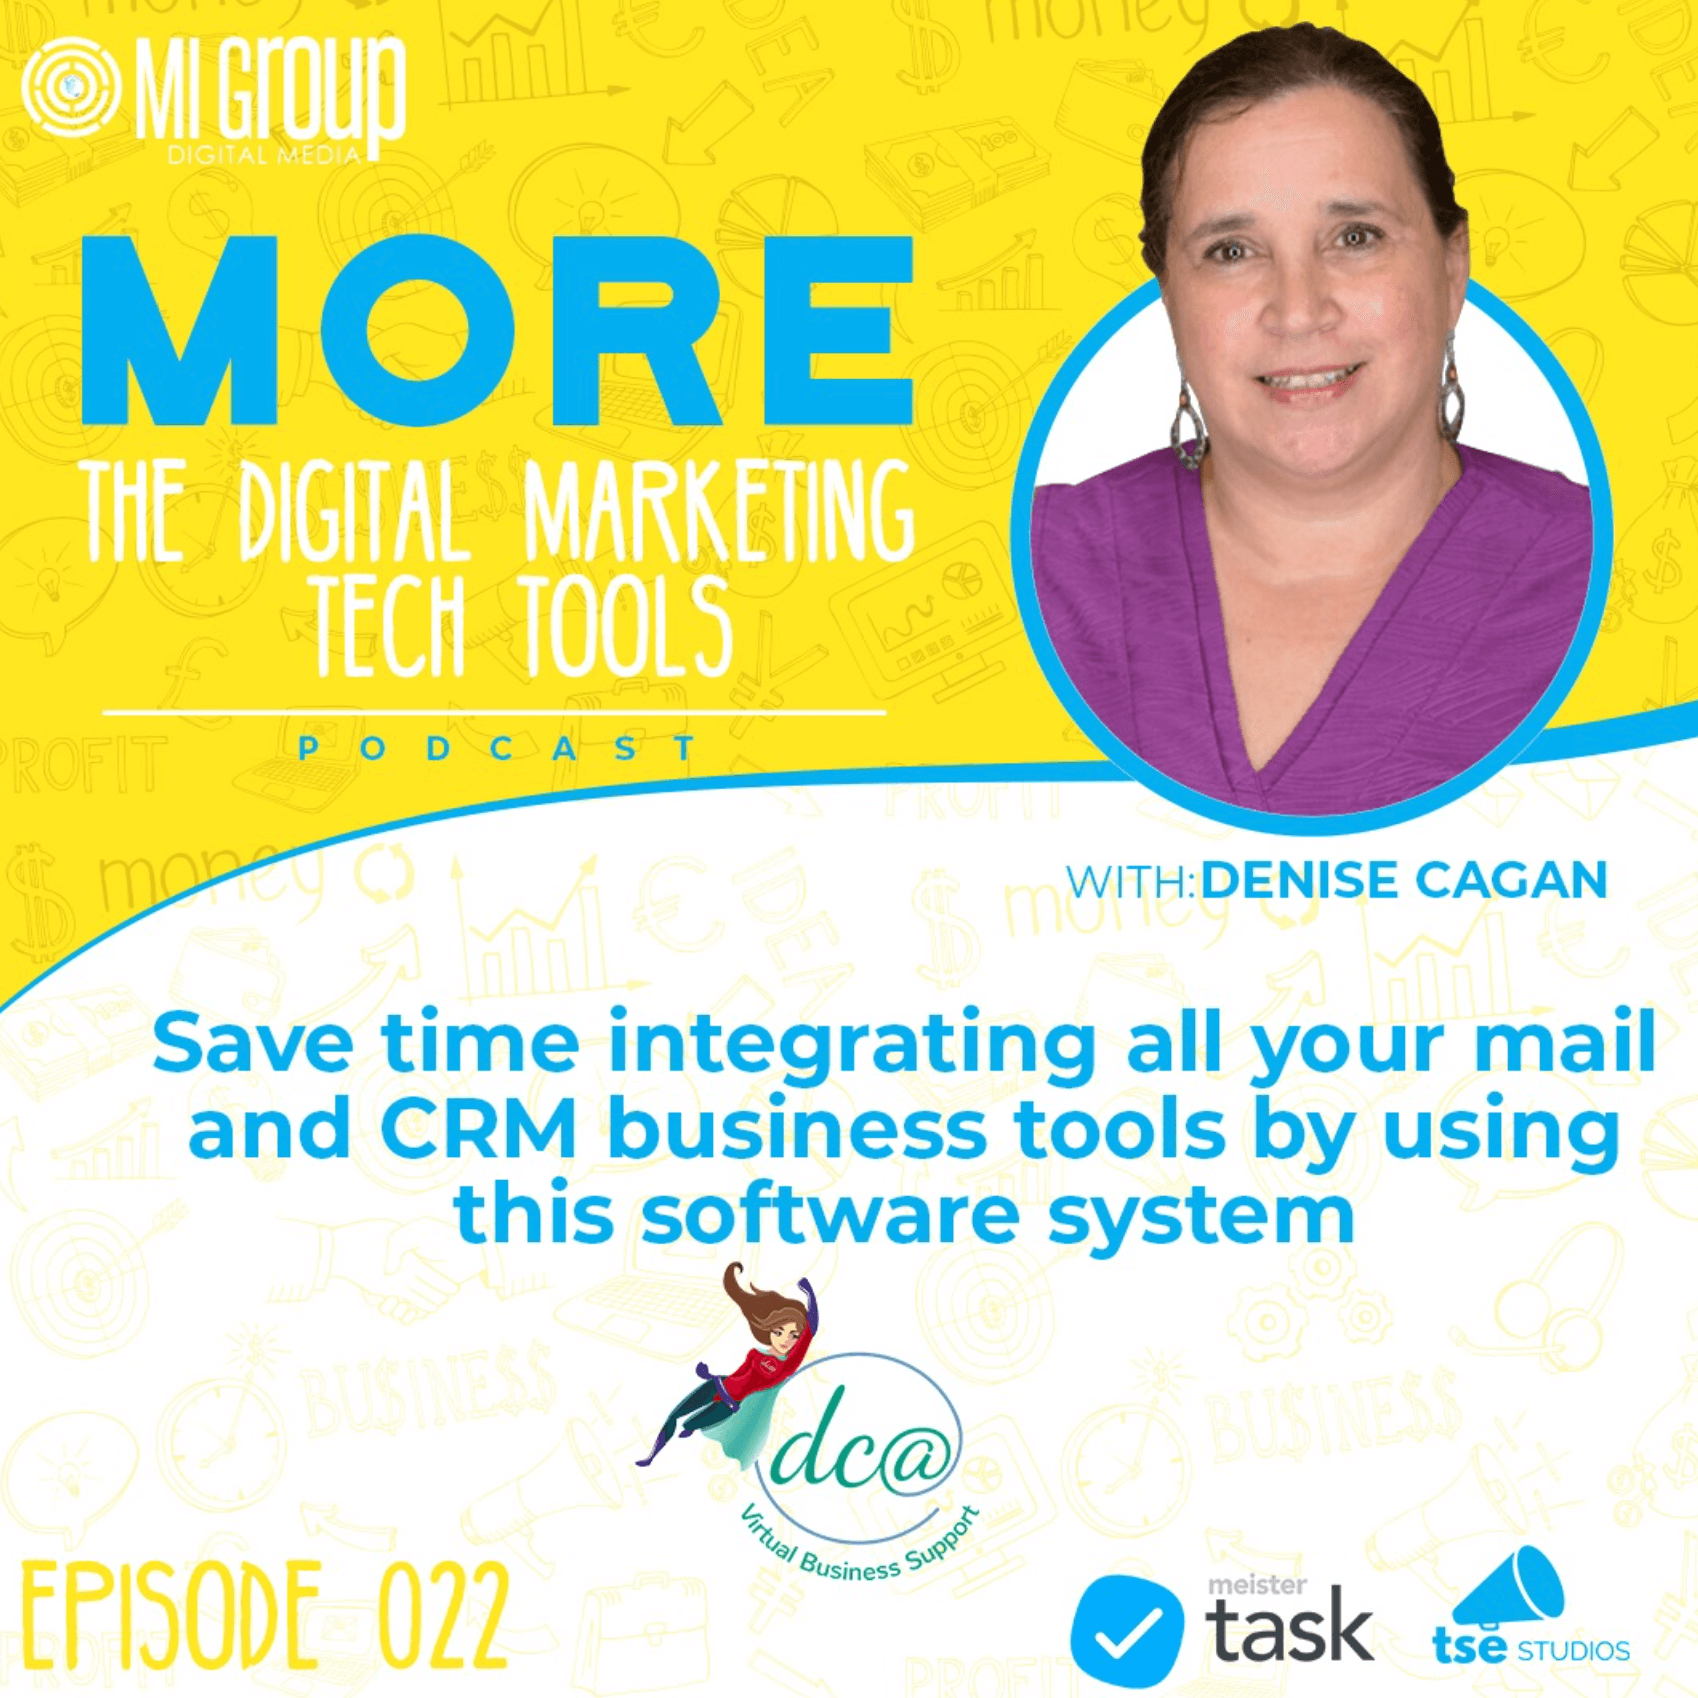 More The Digital Marketing Tech Tools Podcast: Episode 22 - Save Time Integrating All Your Mail and CRM Business Tools by Using This Software System, with Denise Cagan of DCA Virtual Business Support. Media